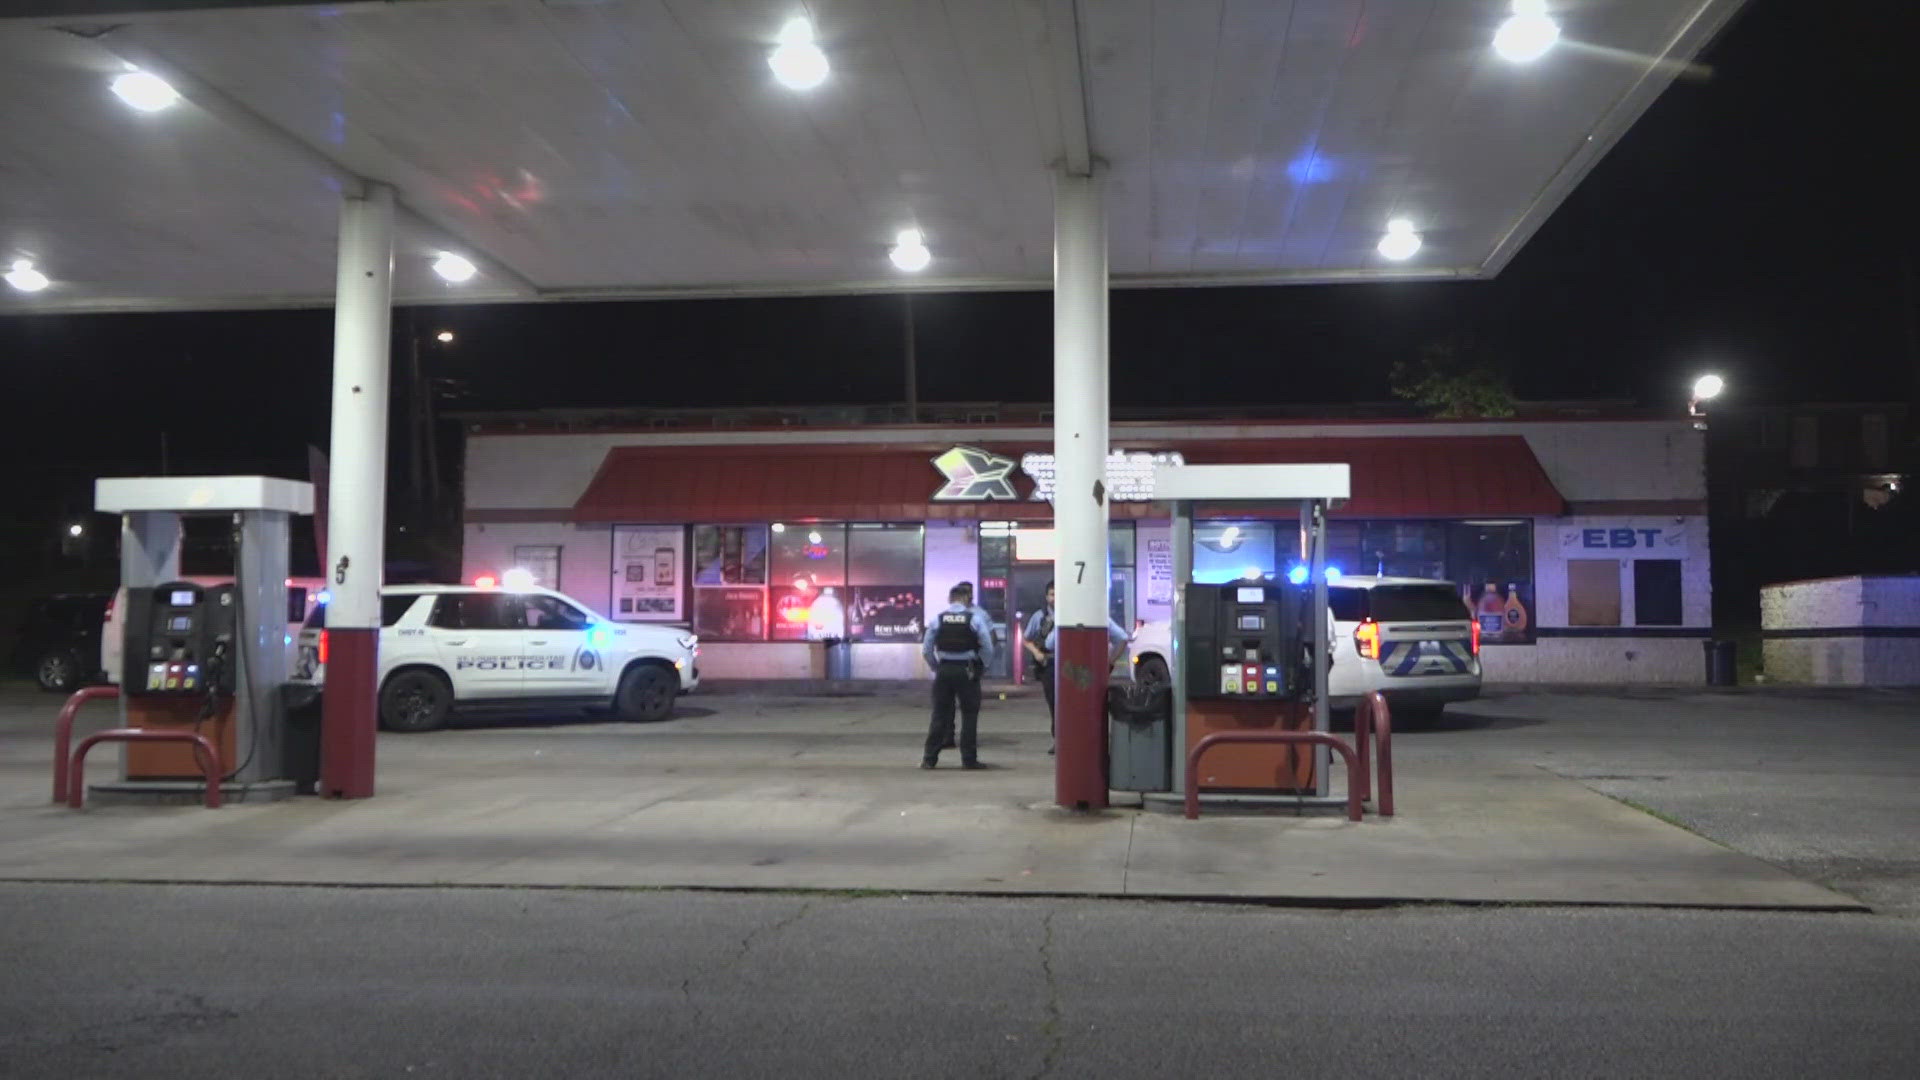 A shooting late Wednesday night at a gas station in north St. Louis left a man dead and a child critically injured. The shooter remains at large.